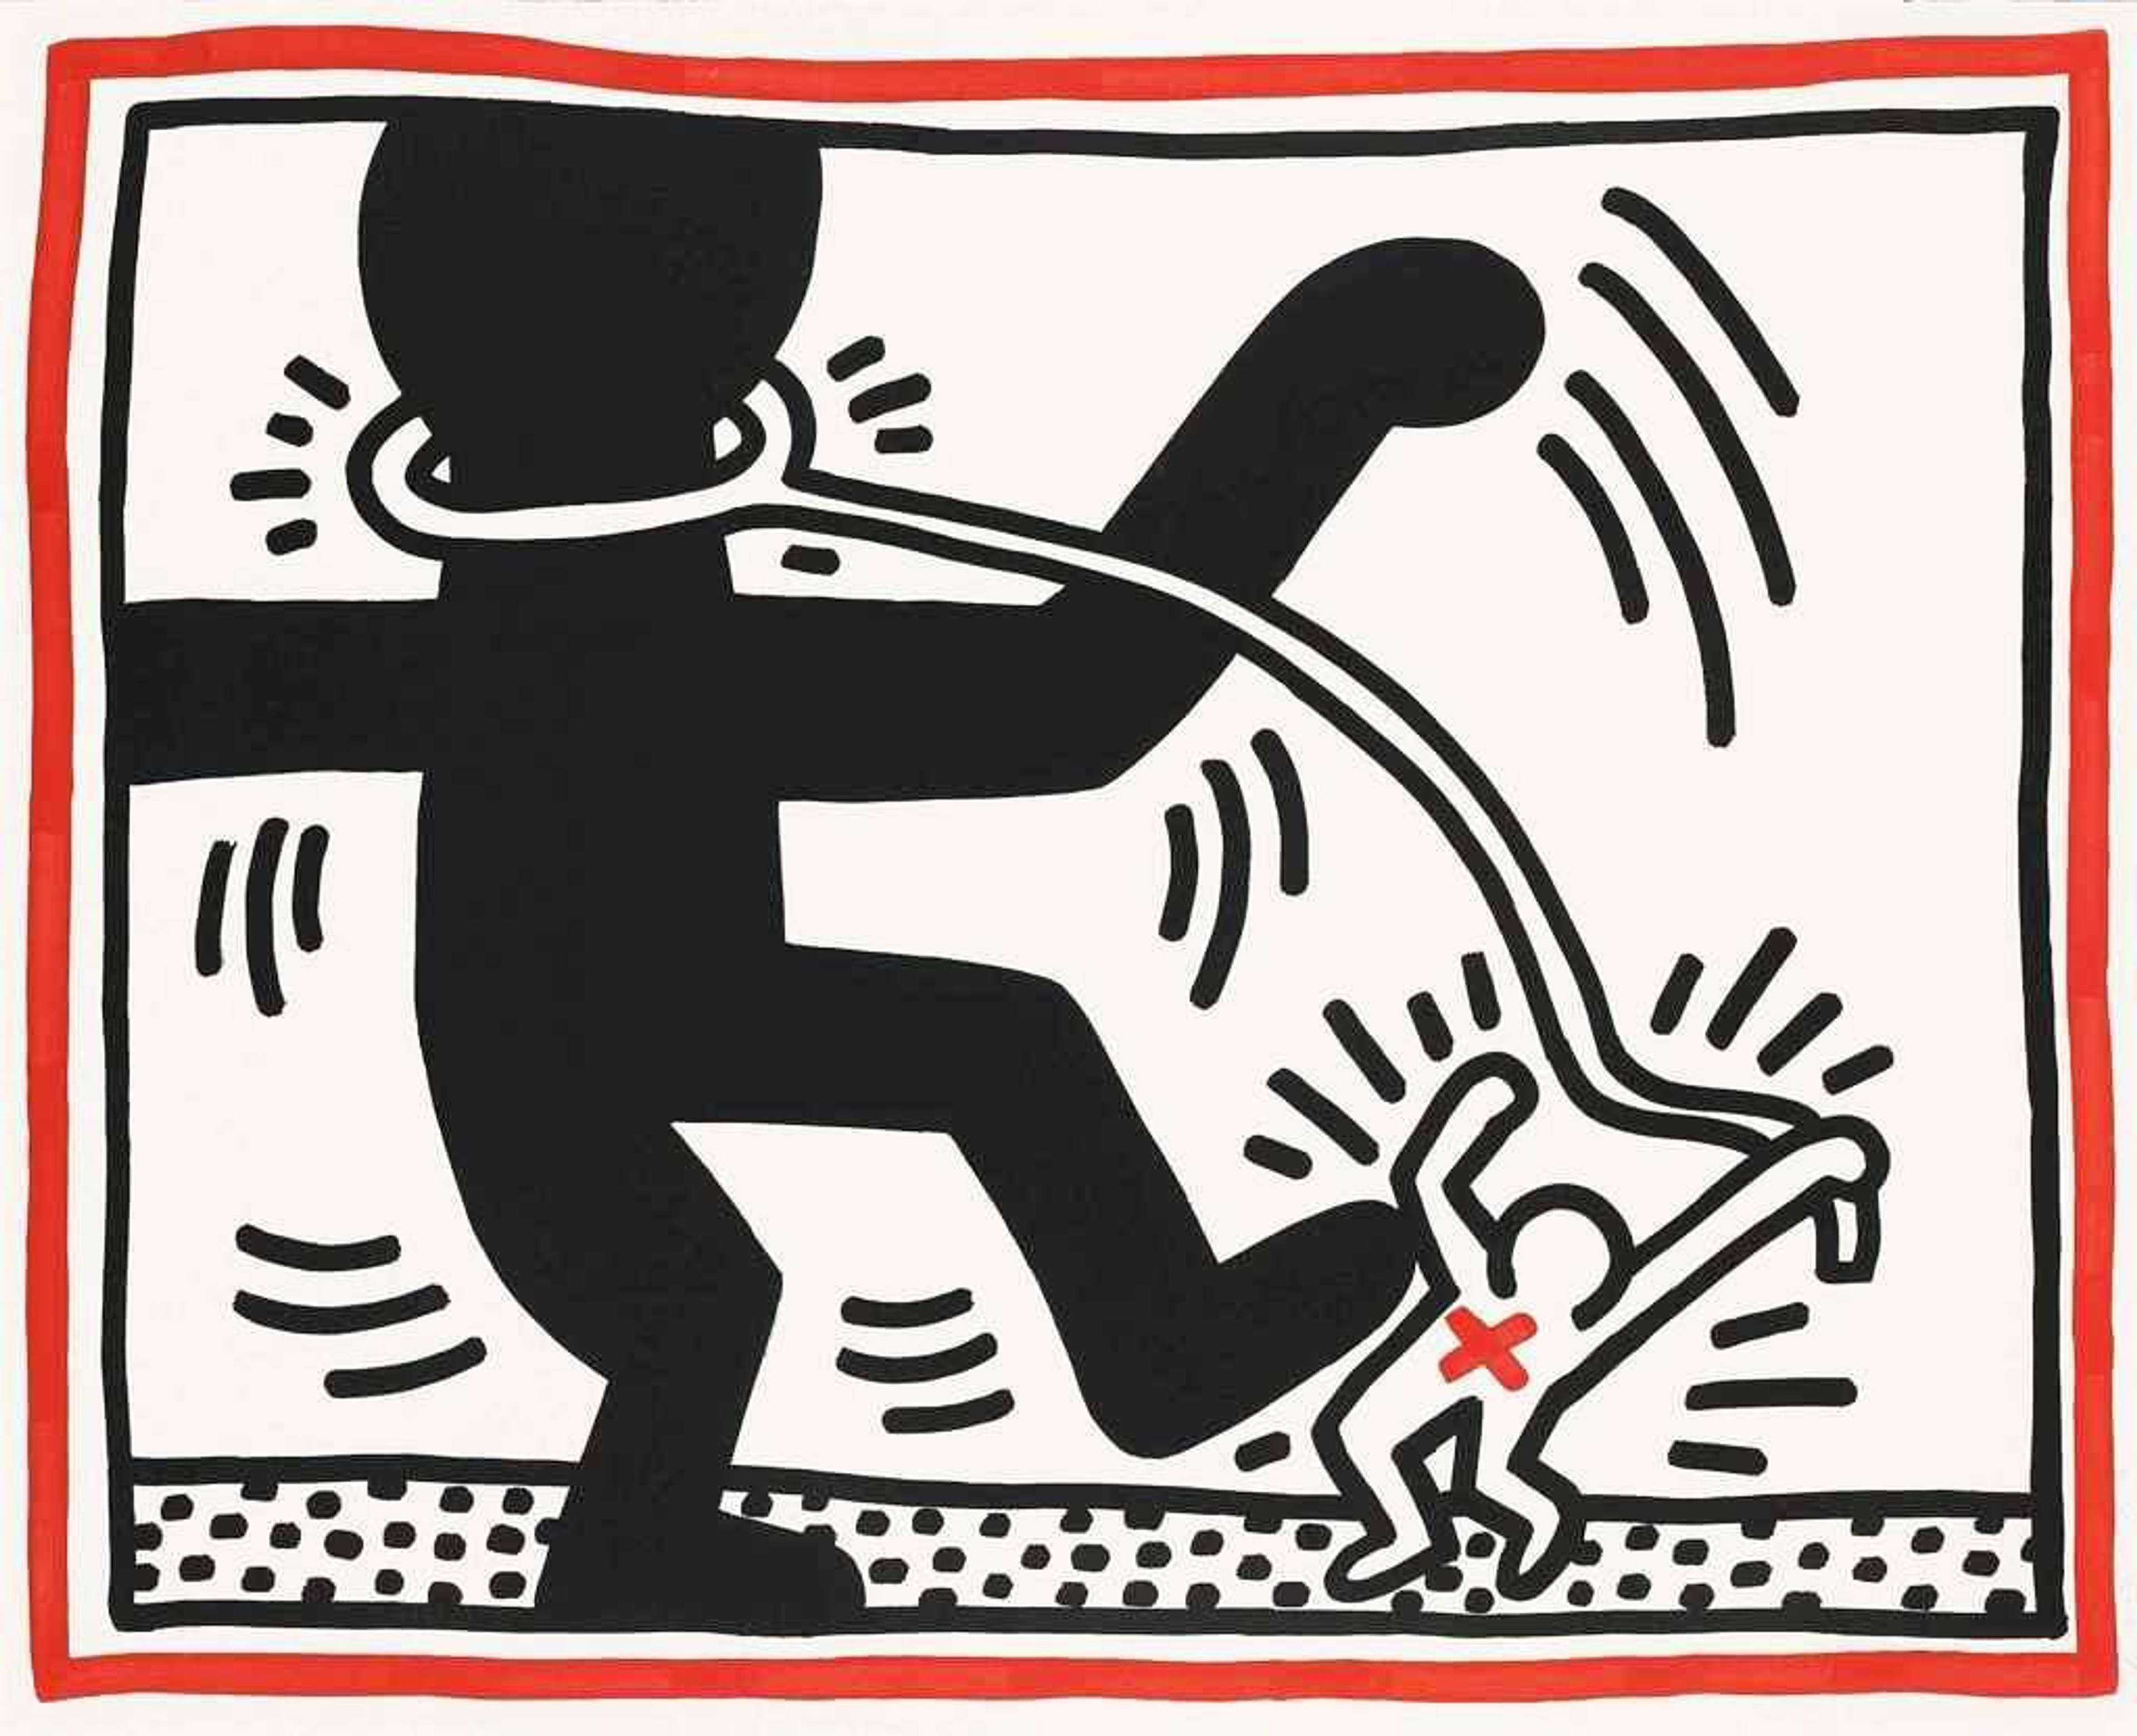 Keith Haring’s Free South Africa 2. A Pop Art screenprint of a black figure raising its foot, stepping on the outline of a white figure in the style of Pop Art